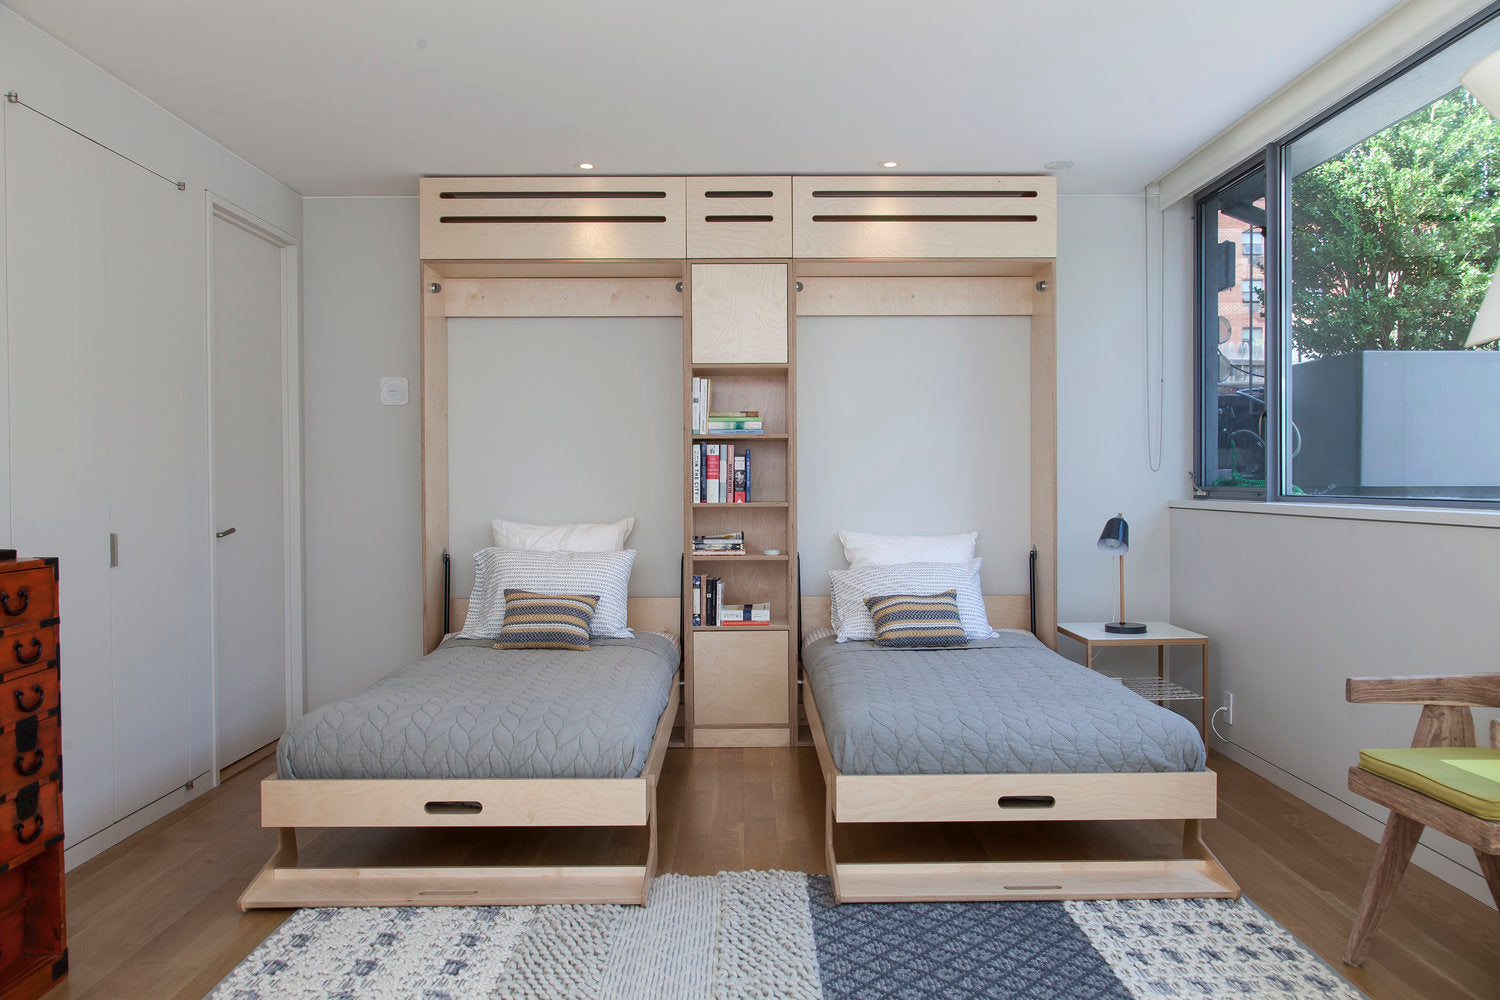 Modern room with twin beds, storage drawers, and shelves, in light wood tones and white.